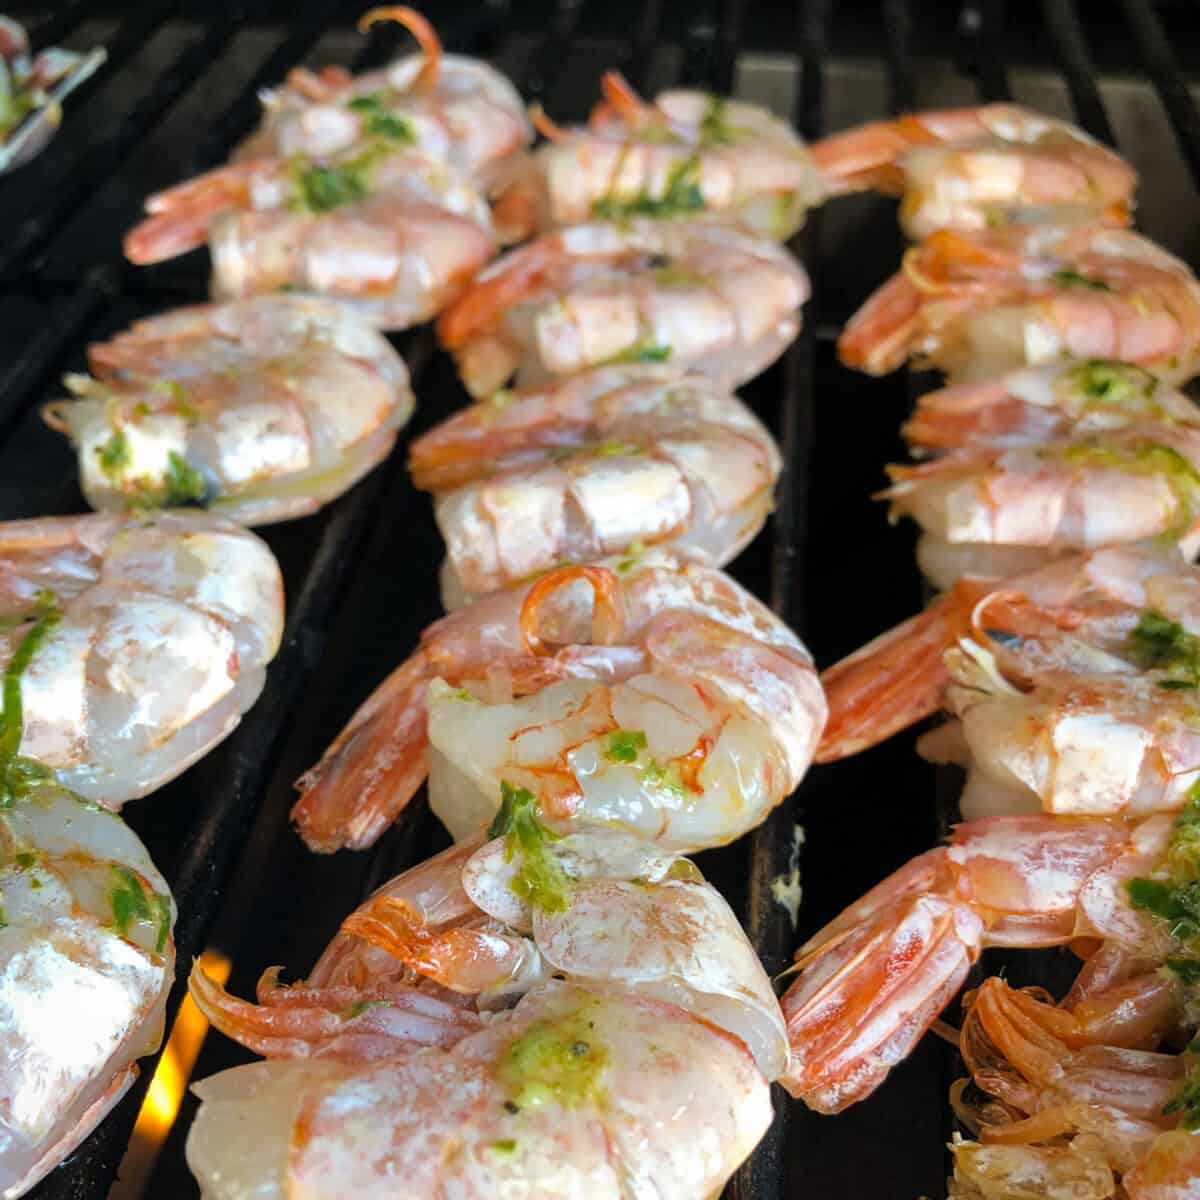 Skewered shrimp getting cooked on grill.